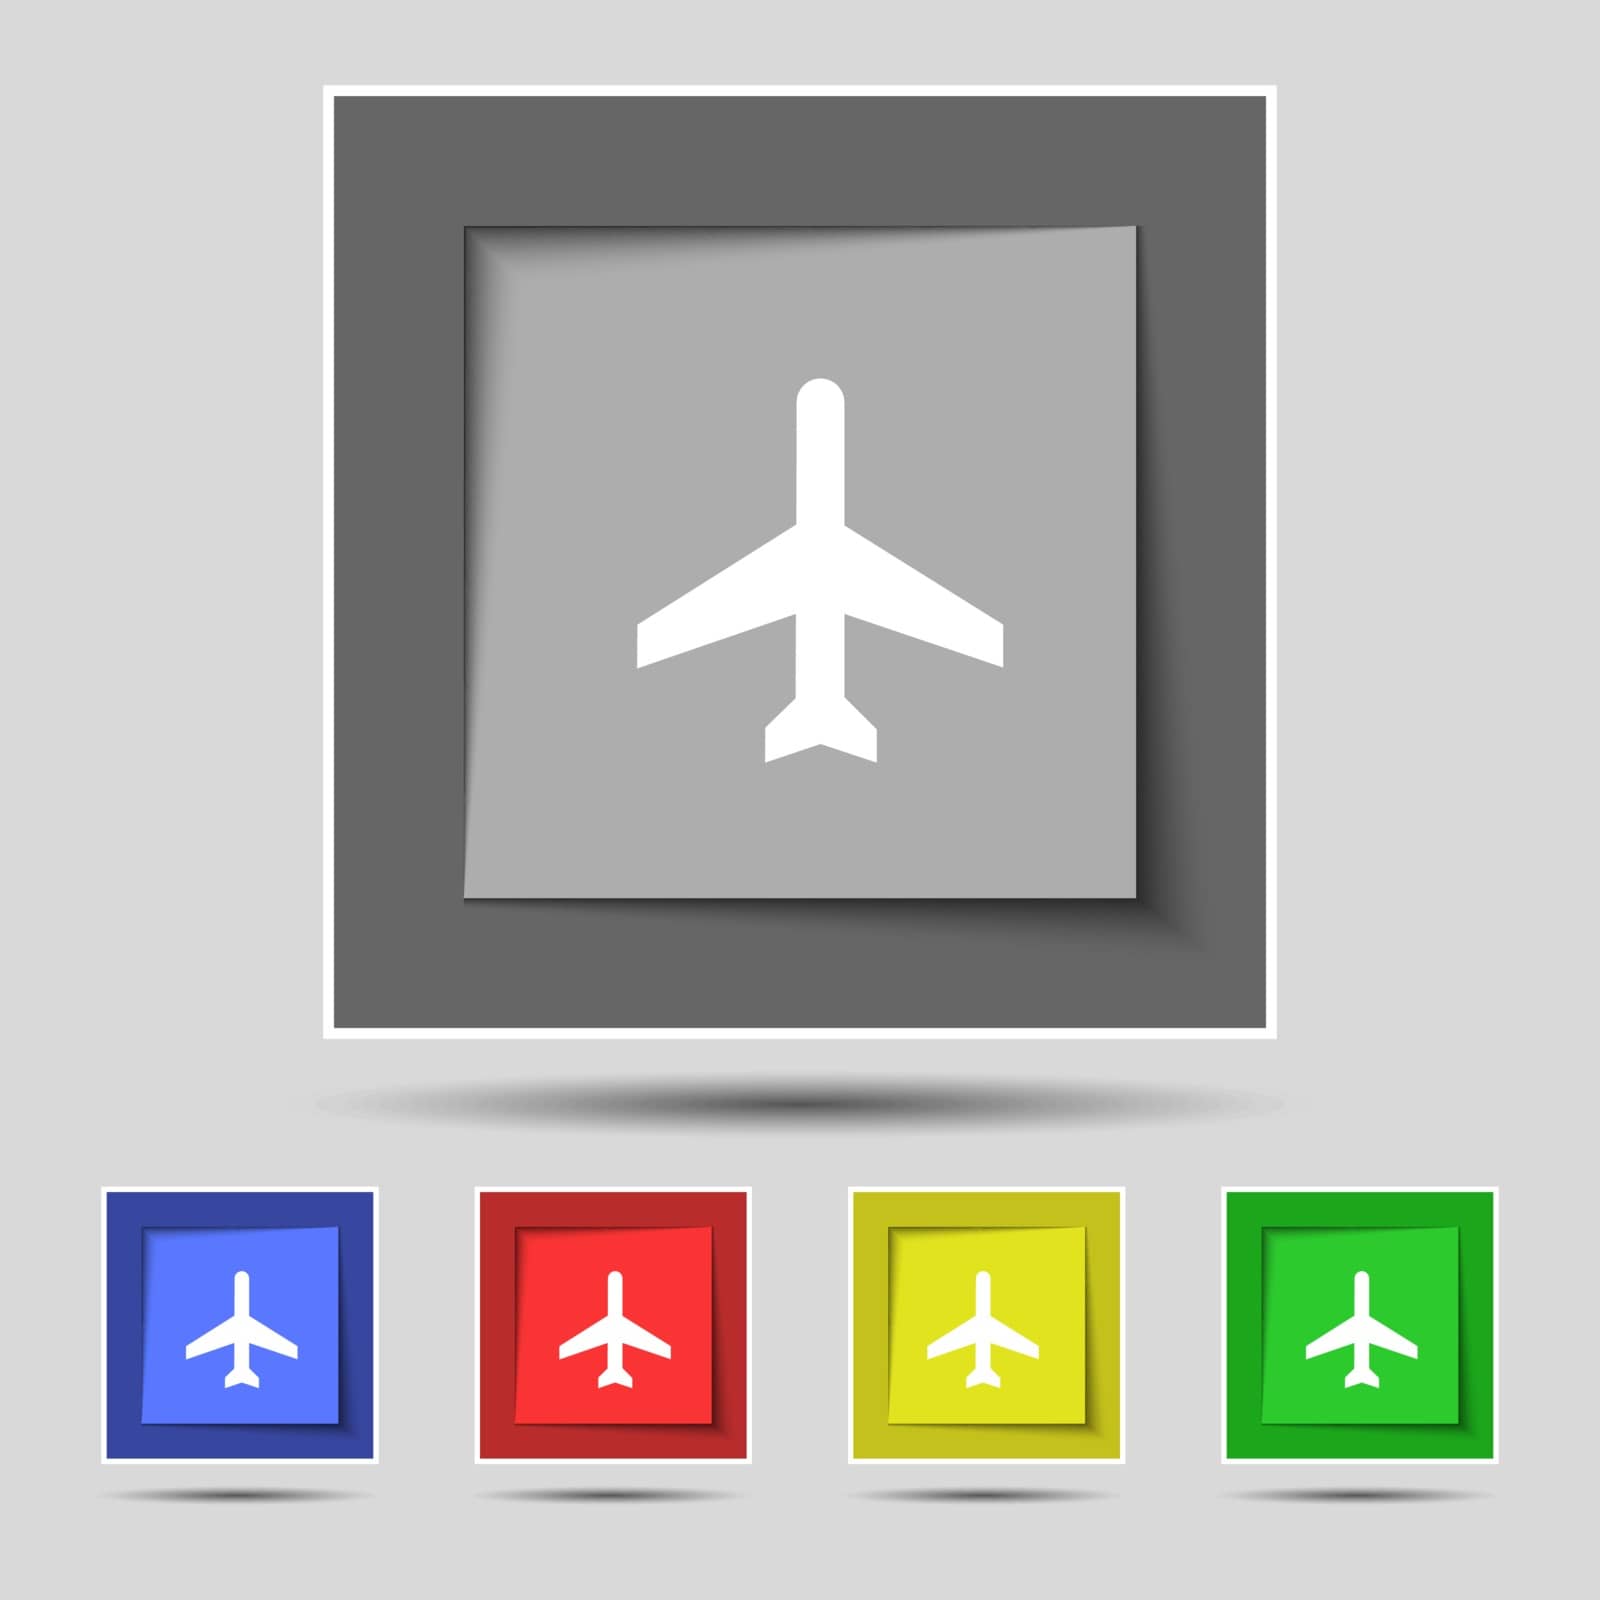 Plane icon sign on original five colored buttons. Vector illustration